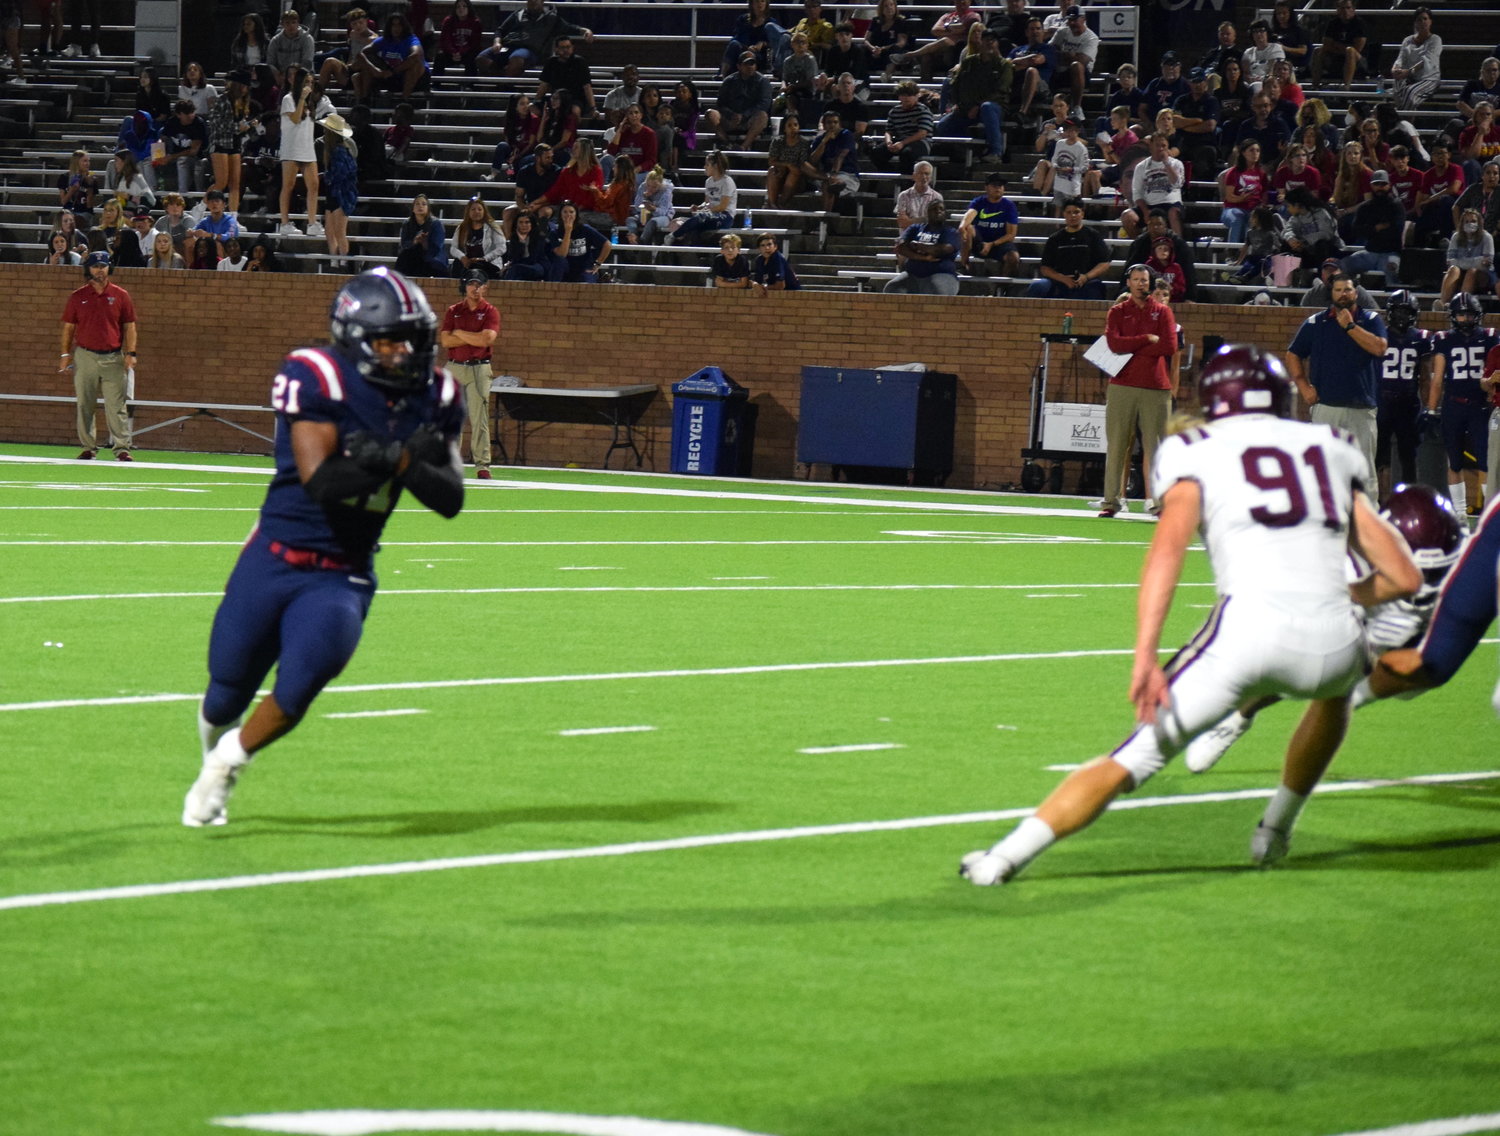 Tompkins’ Caleb Blocker pretends to run with the ball on a play action during a game against Cinco Ranch at Rhodes Stadium on Thursday.